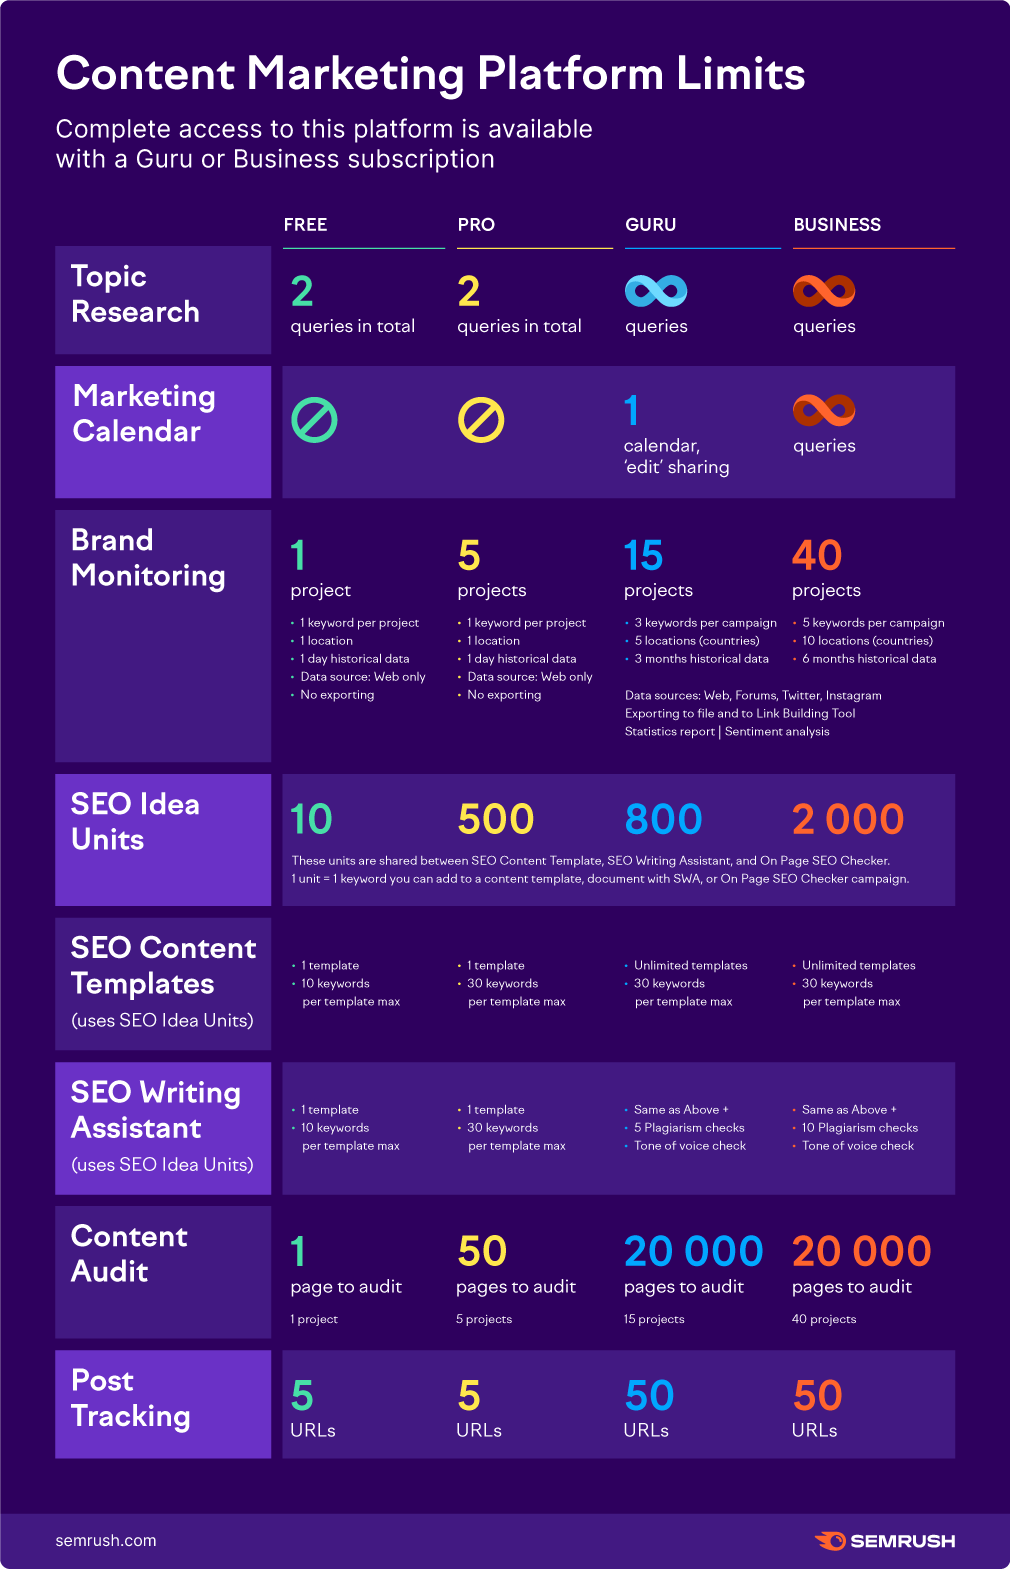 Content Marketing limits infographic